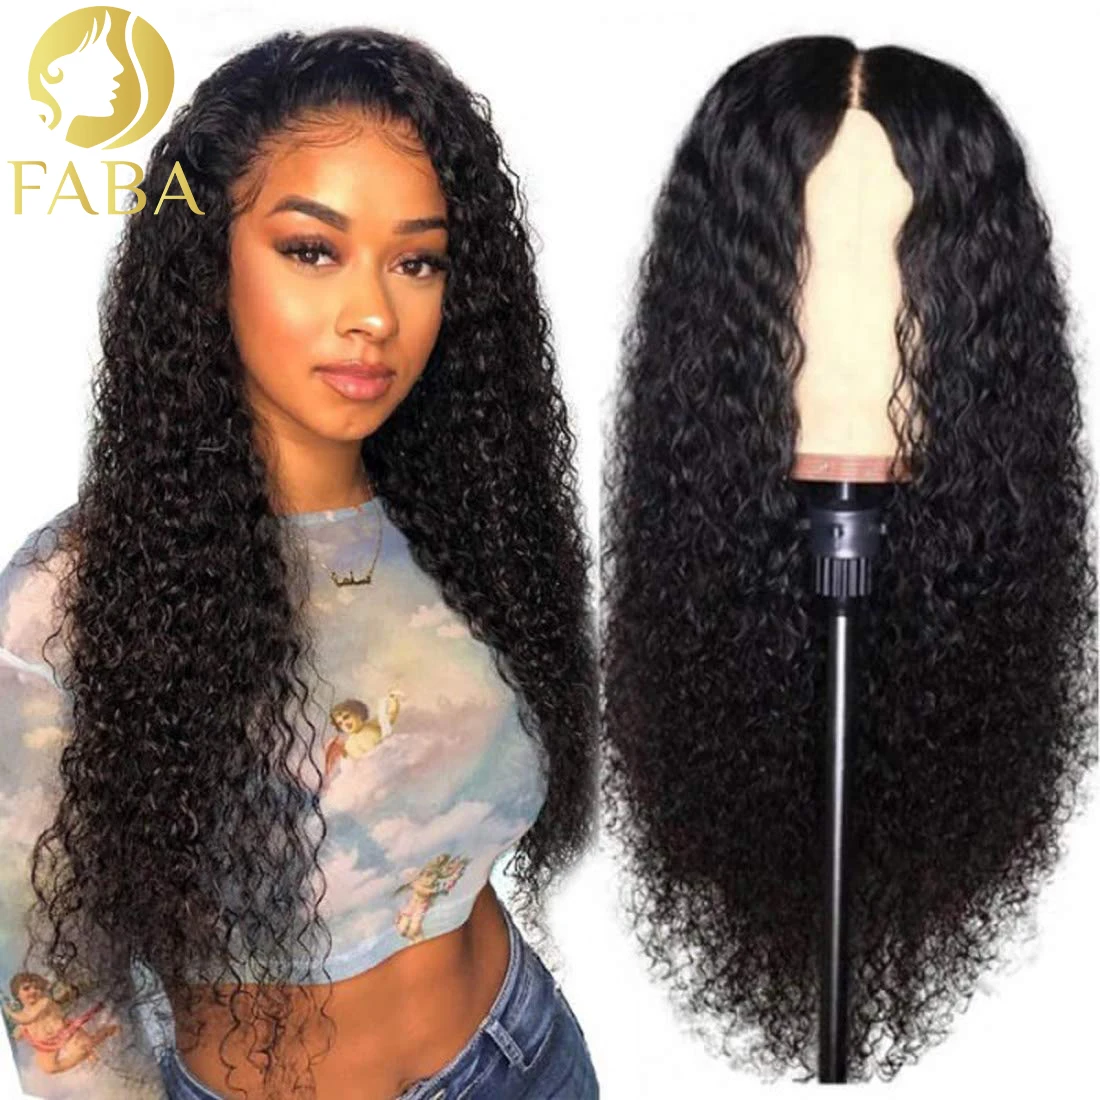 Curly Human Hair Wig 13x4 Front Sheer Lace Gradient Color Women Original Brazilian Virgin Hair Wig 180 Density Size 12-28 Inches